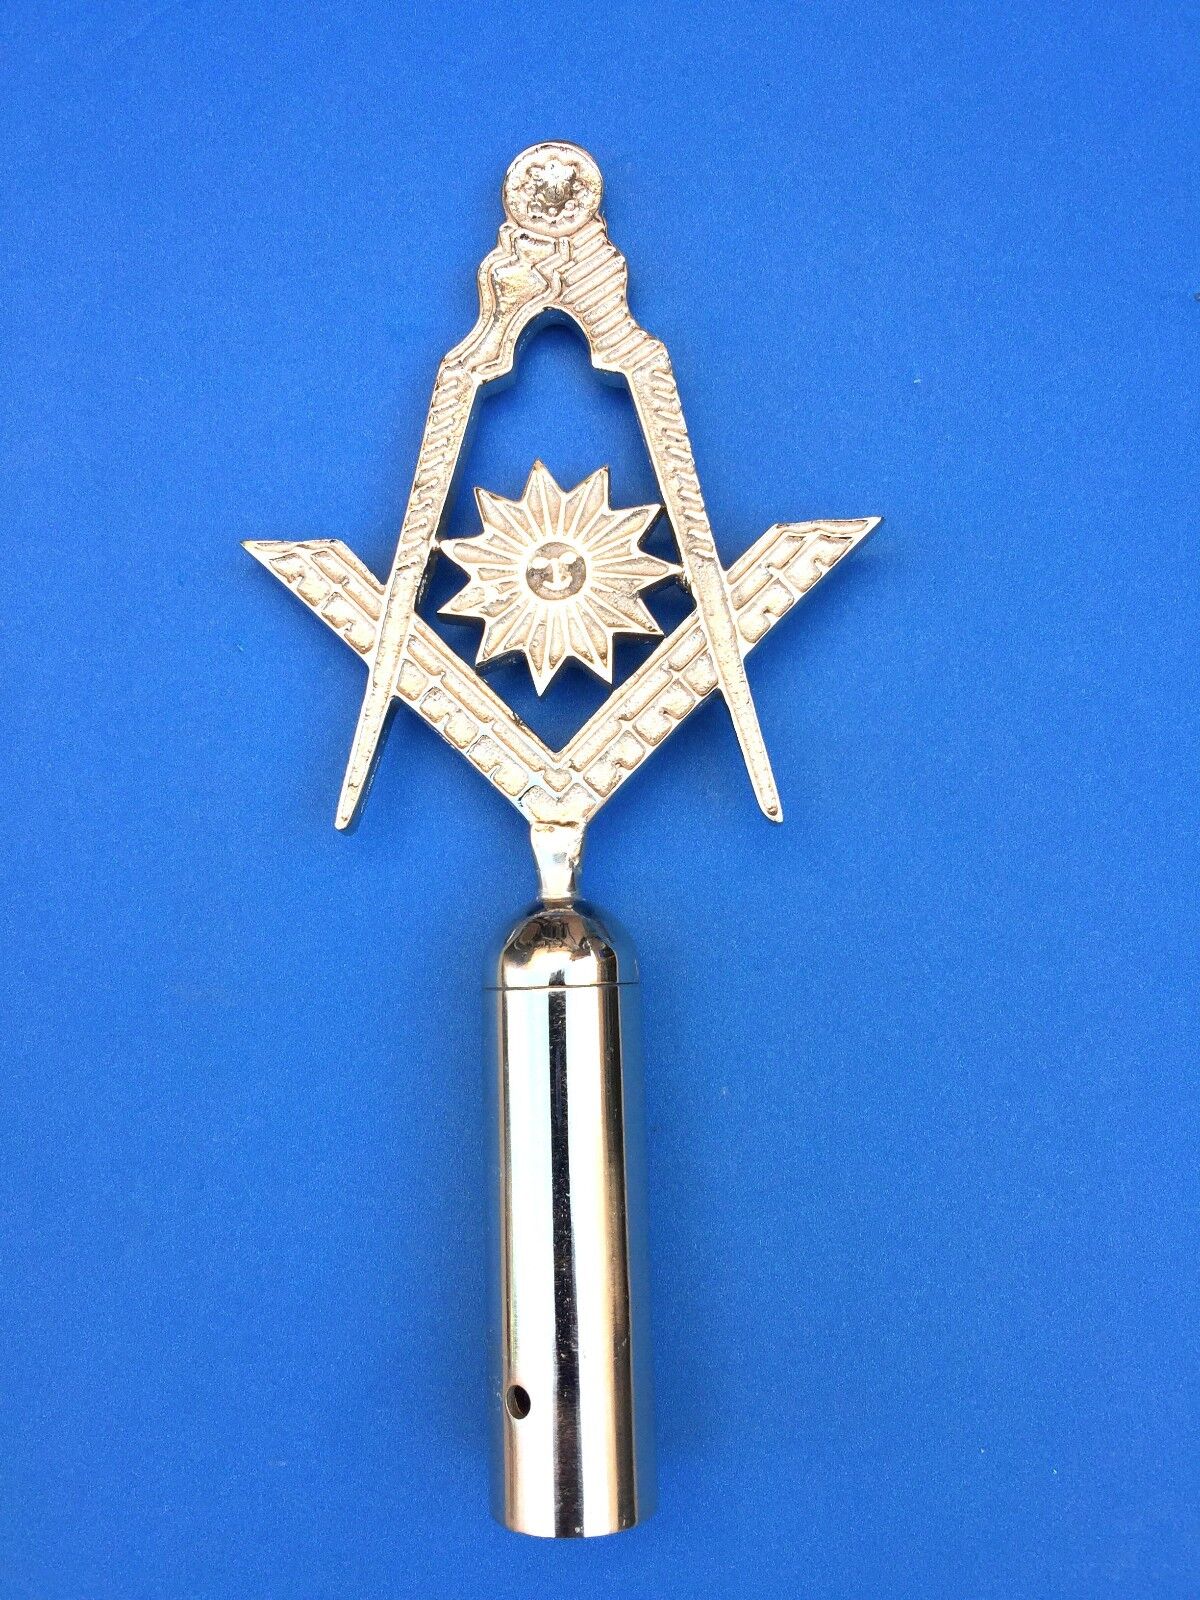 Lodge Senior Decon Top Rod for Masonic Ceremonies Silver Finished